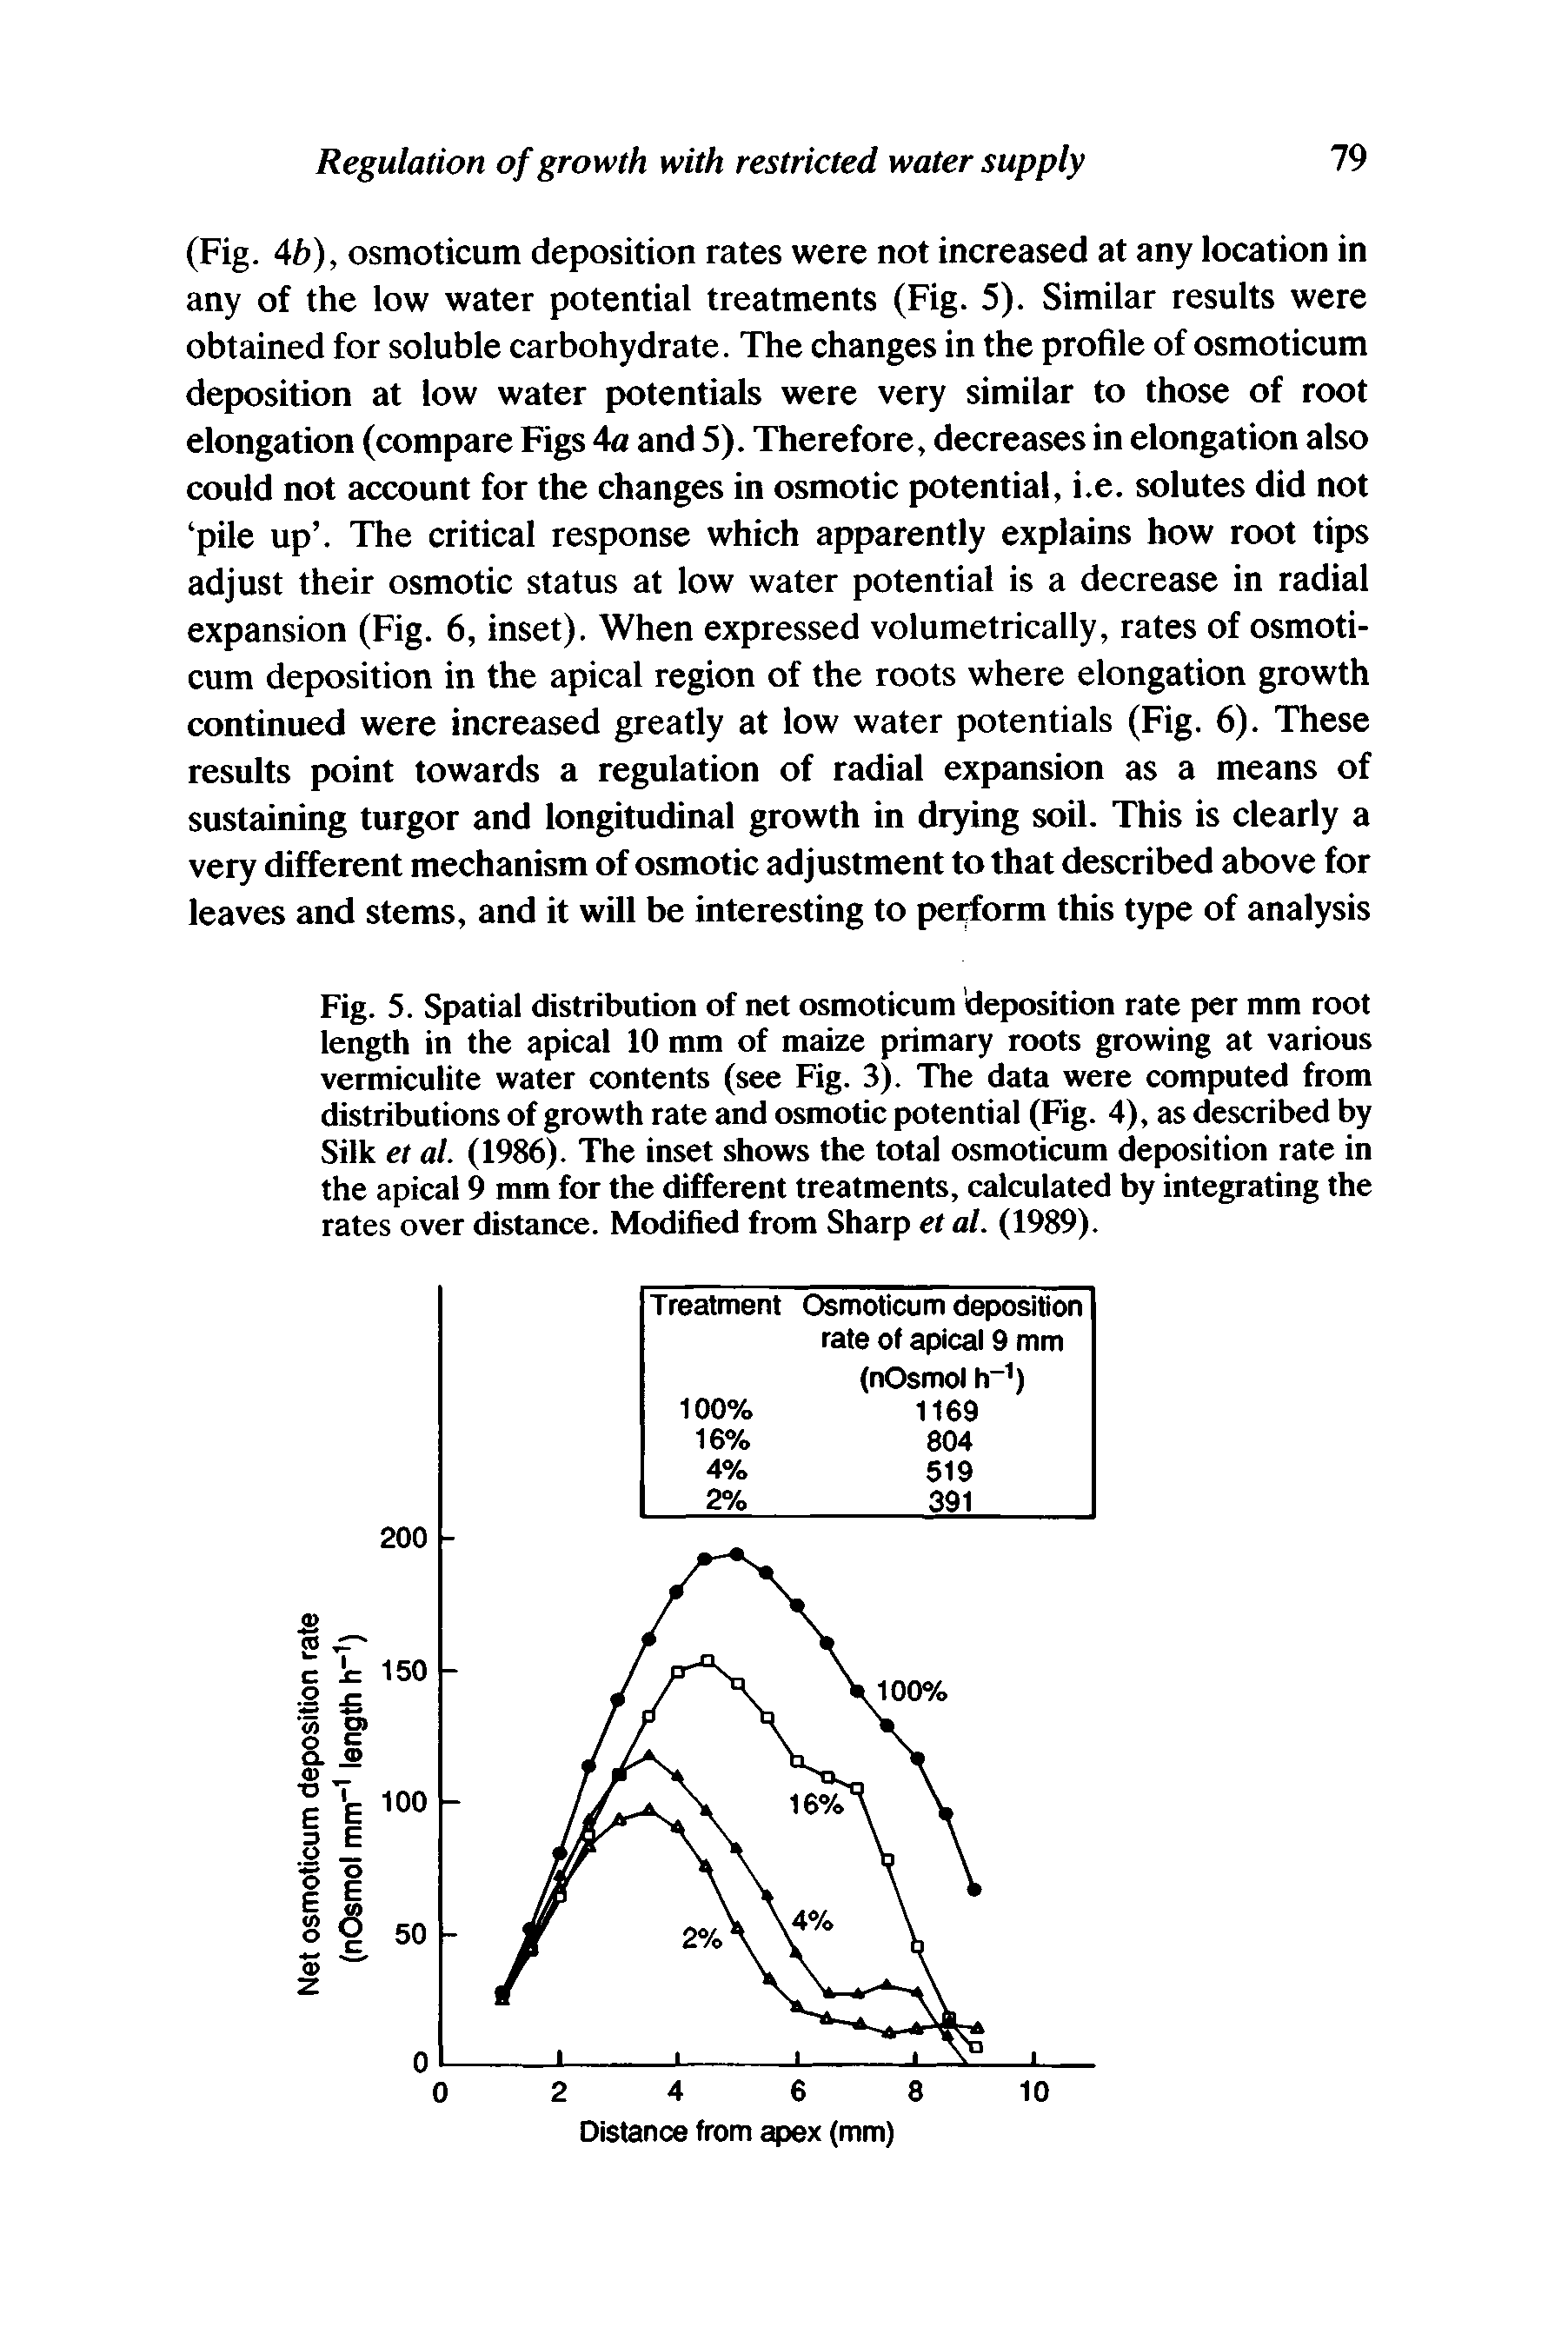 Fig. 5. Spatial distribution of net osmoticum deposition rate per mm root length in the apical 10 mm of maize primary roots growing at various vermiculite water contents (see Fig. 3). The data were computed from distributions of growth rate and osmotic potential (Fig. 4), as described by Silk et al. (1986). The inset shows the total osmoticum deposition rate in the apical 9 mm for the different treatments, calculated by integrating the rates over distance. Modified from Sharp et al. (1989).